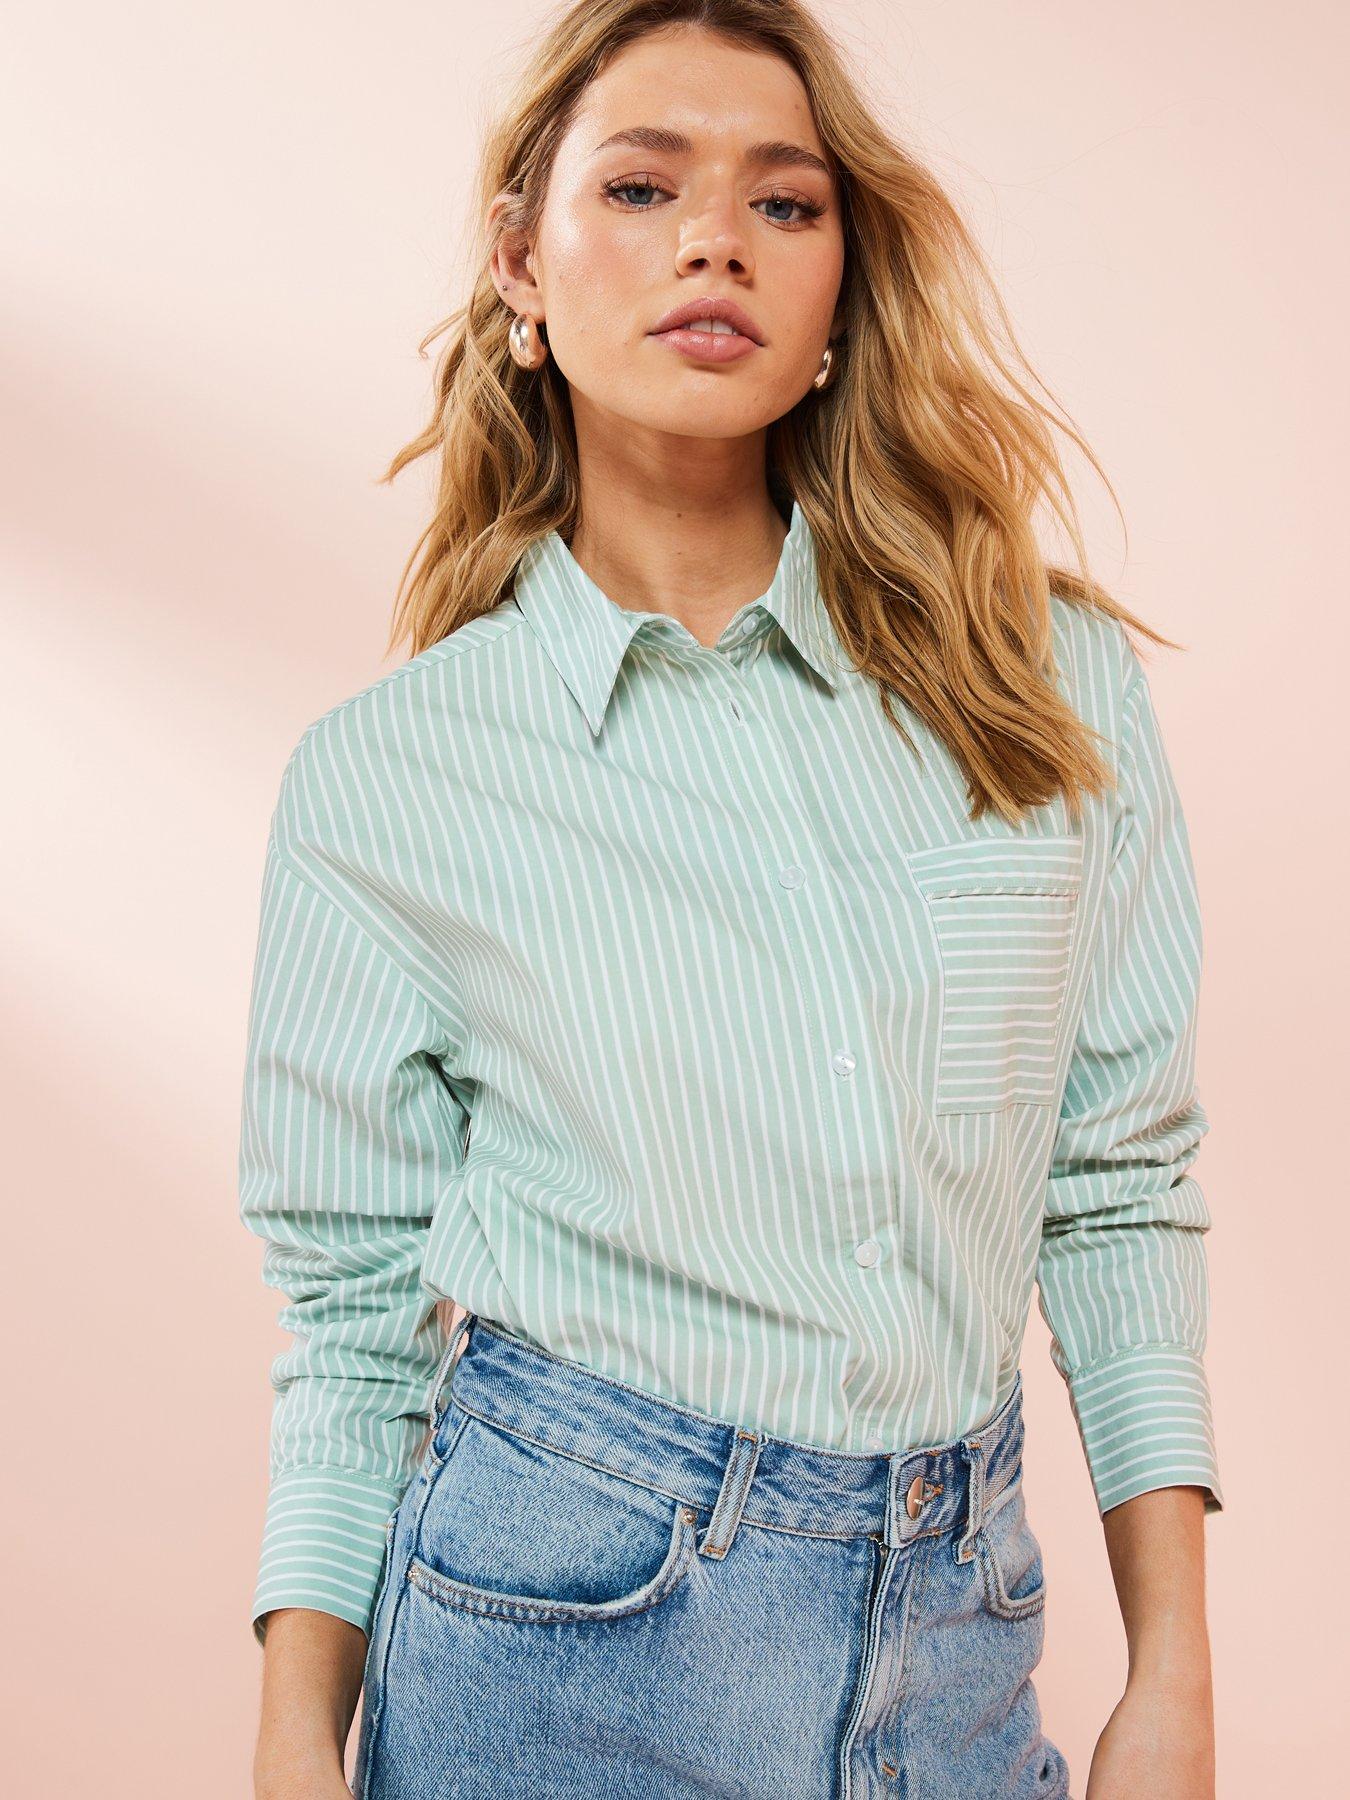 V by Very Sheer Ruffle Blouse - Teal